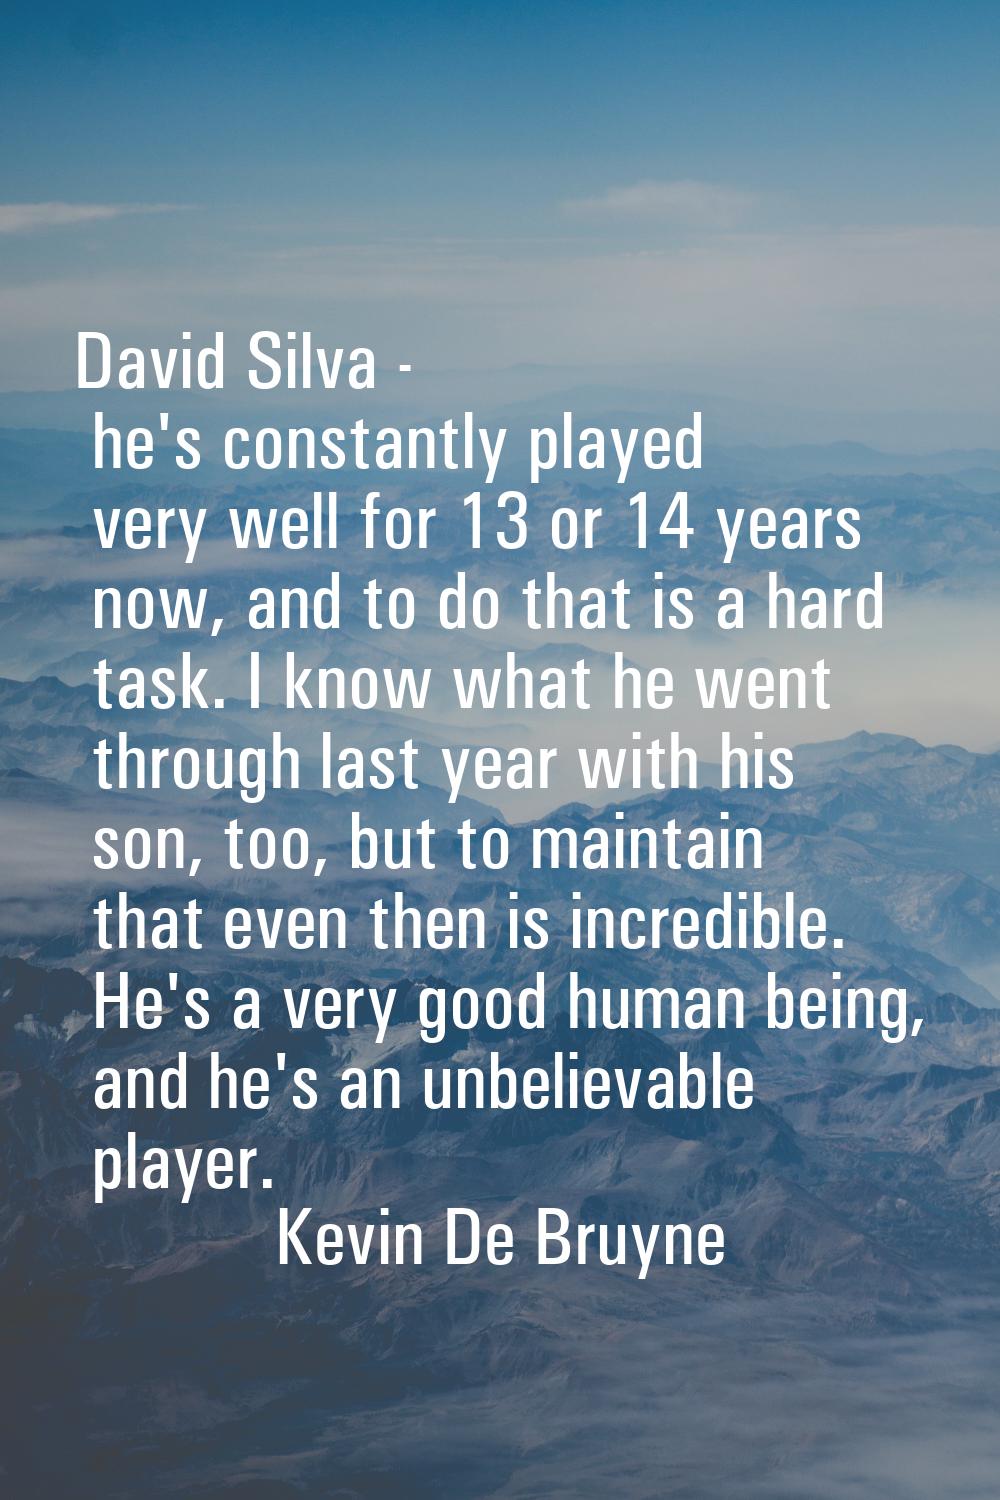 David Silva - he's constantly played very well for 13 or 14 years now, and to do that is a hard tas